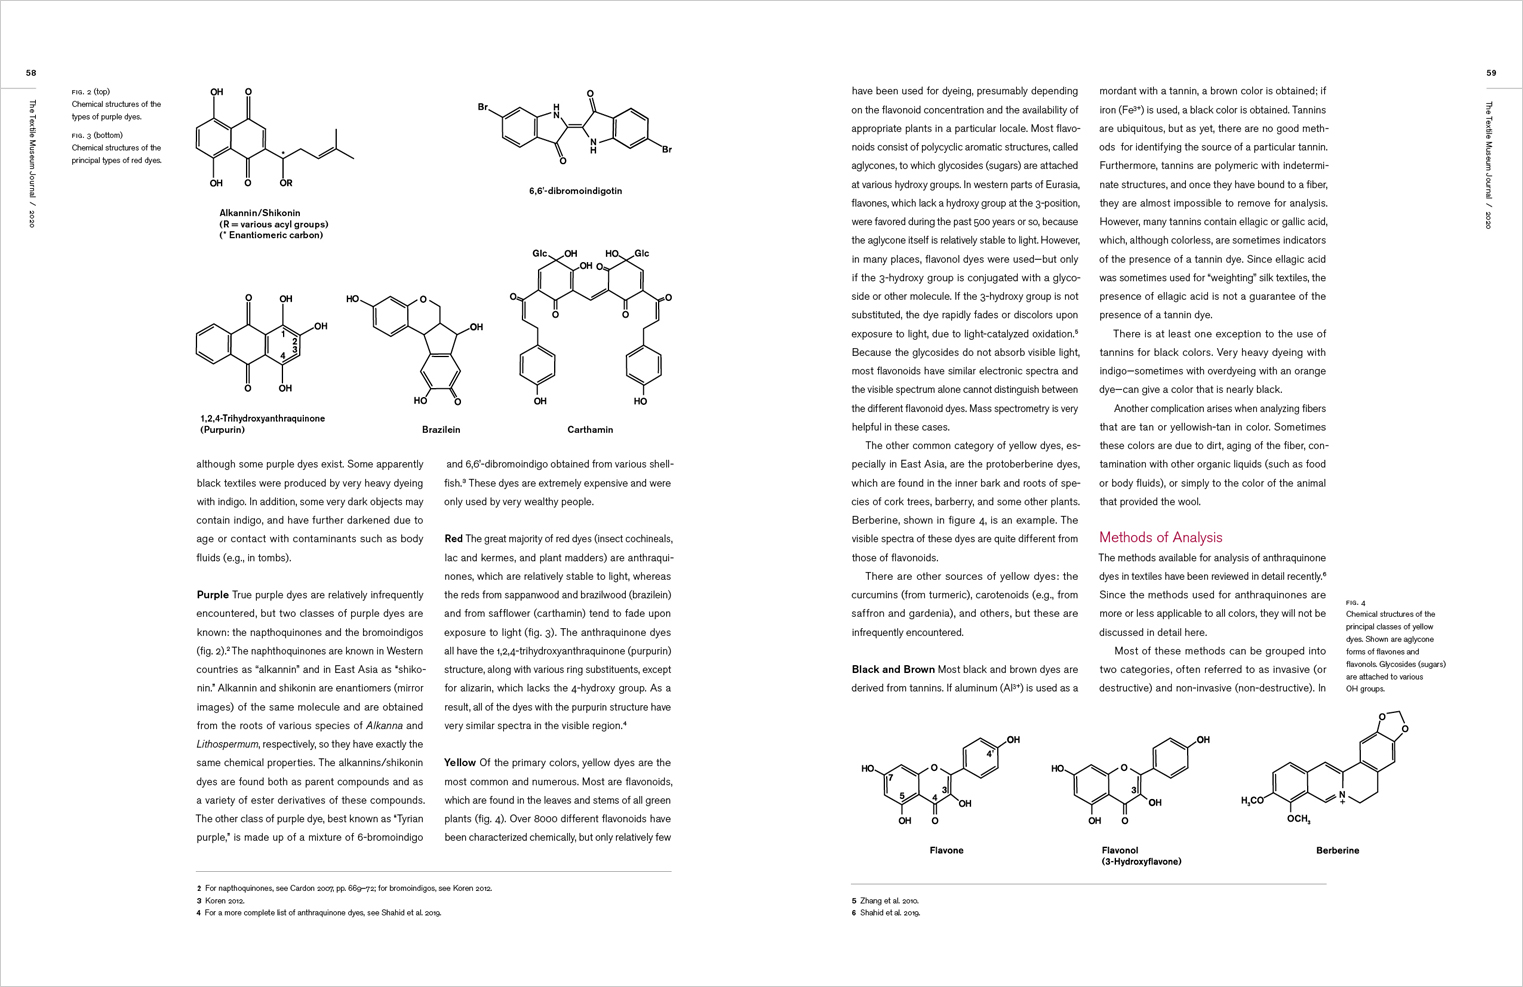 Interior spread from the Textile Museum Journal Volume 47 2020 featuring chemical structures.